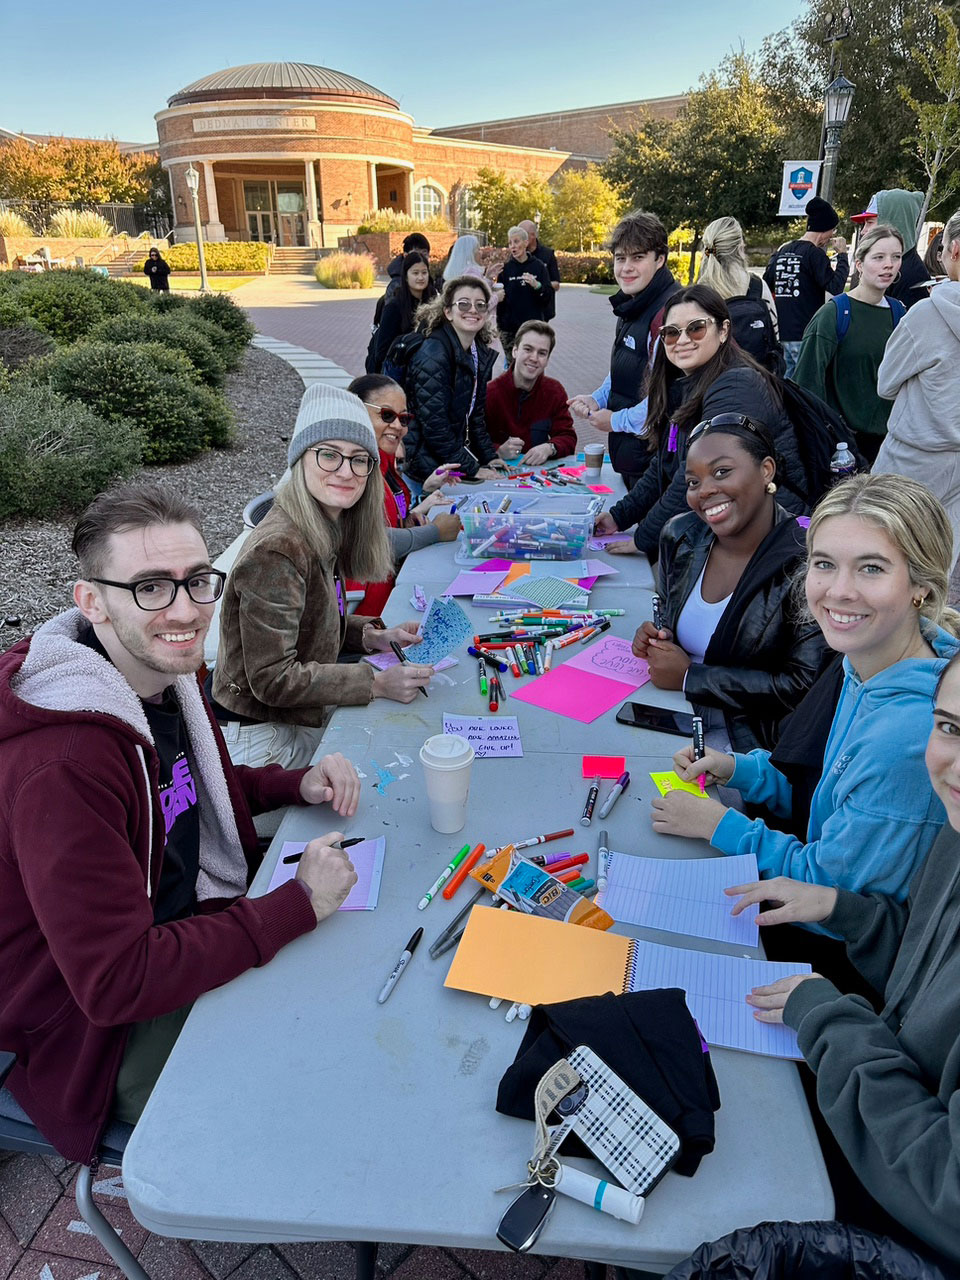 Armstrong Commons students participate in bonding activities.